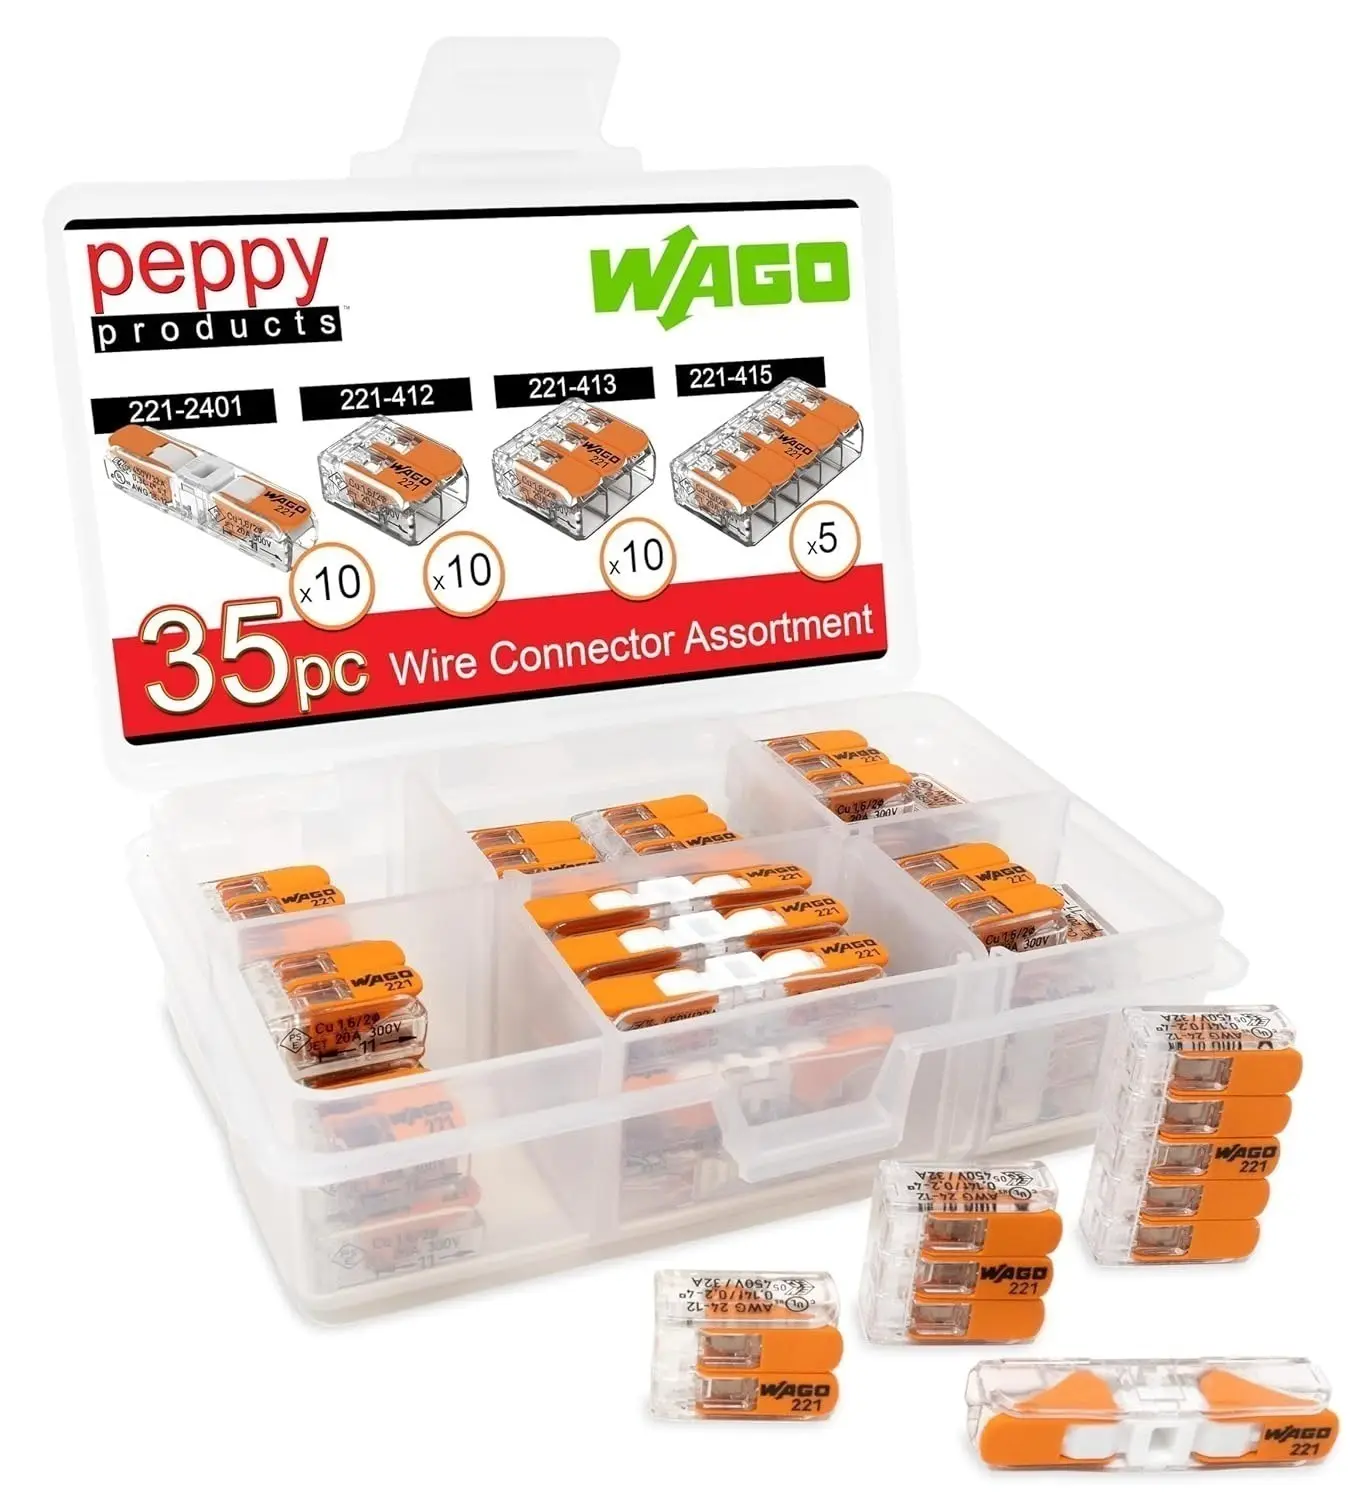 35-Piece WAGO 221 Lever Nuts Splicing Wire Connector Assortment w/ Case